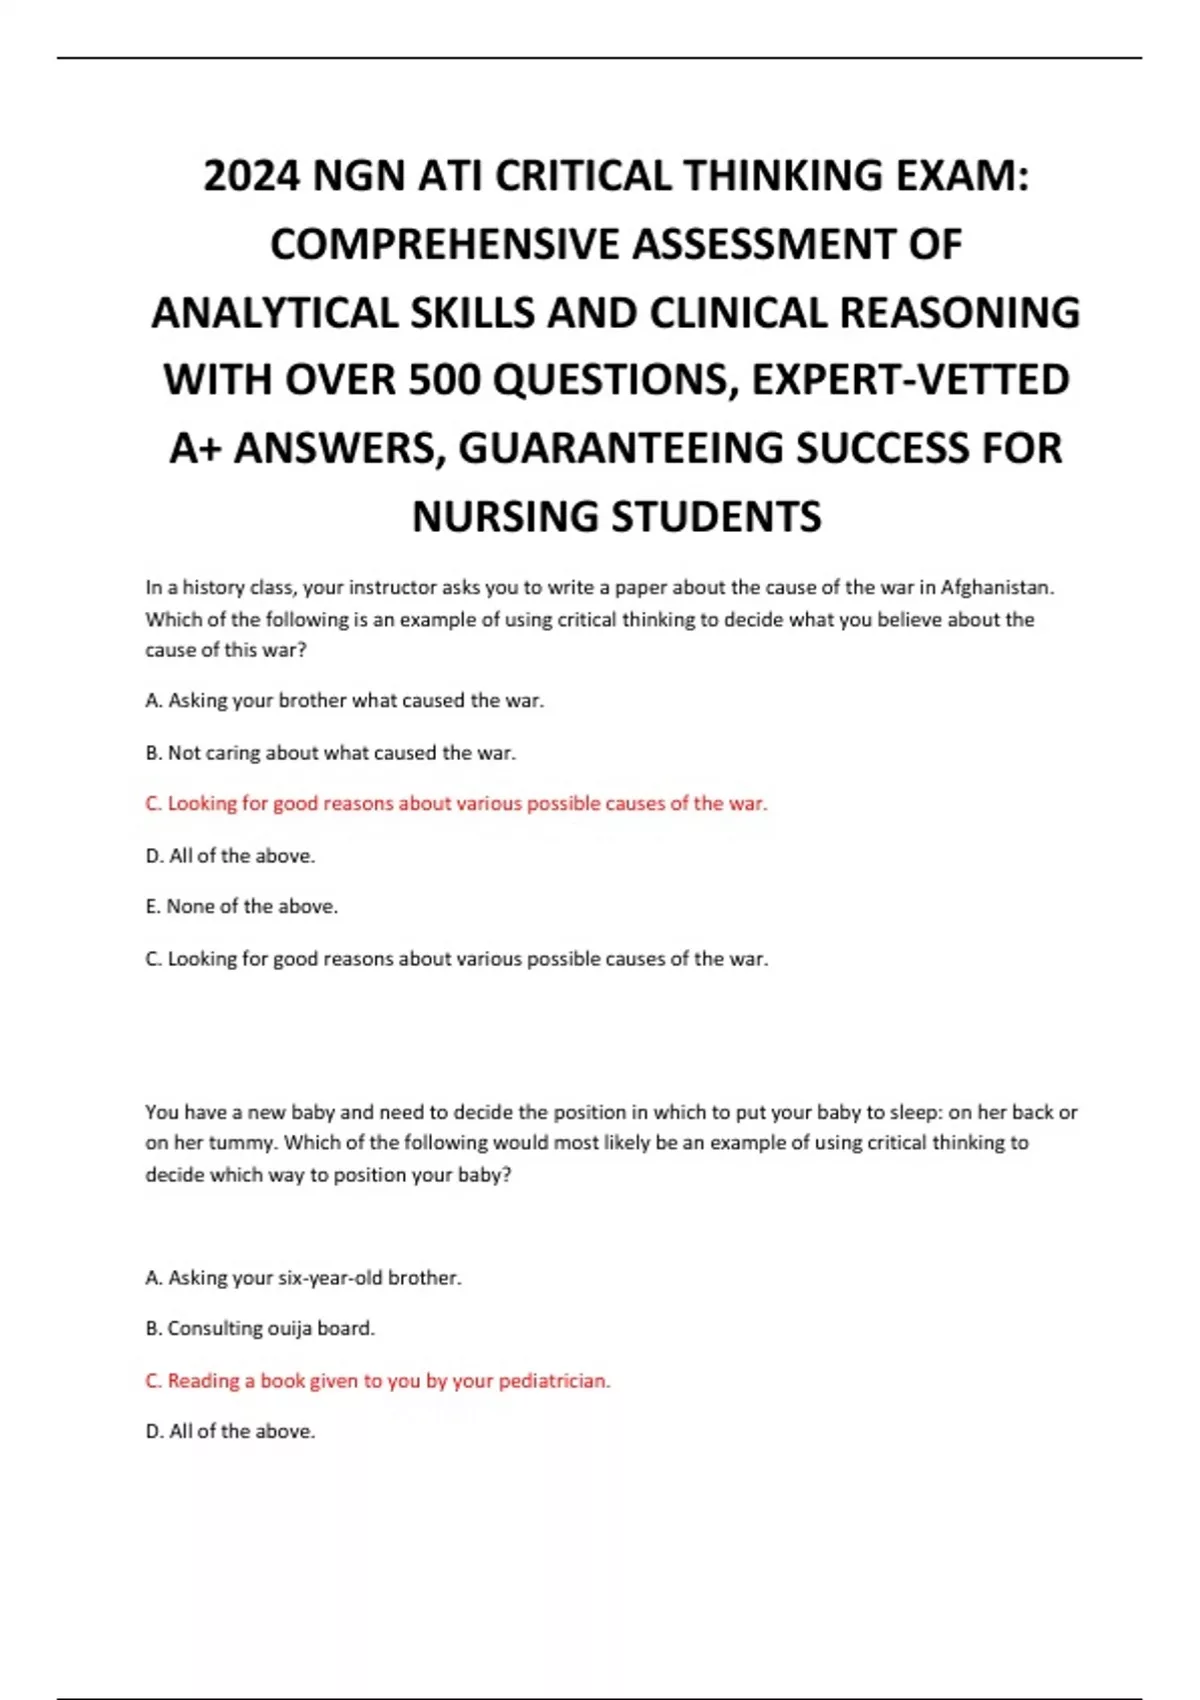 2024 NGN ATI CRITICAL THINKING EXAM: COMPREHENSIVE ASSESSMENT OF ANALYTICAL  SKILLS AND CLINICAL REASONING WITH OVER 500 QUESTIONS, EXPERT-VETTED A+  ANSWERS, GUARANTEEING SUCCESS FOR NURSING STUDENTS - 2024 NGN ATI CRITICAL  THINKING - Stuvia US